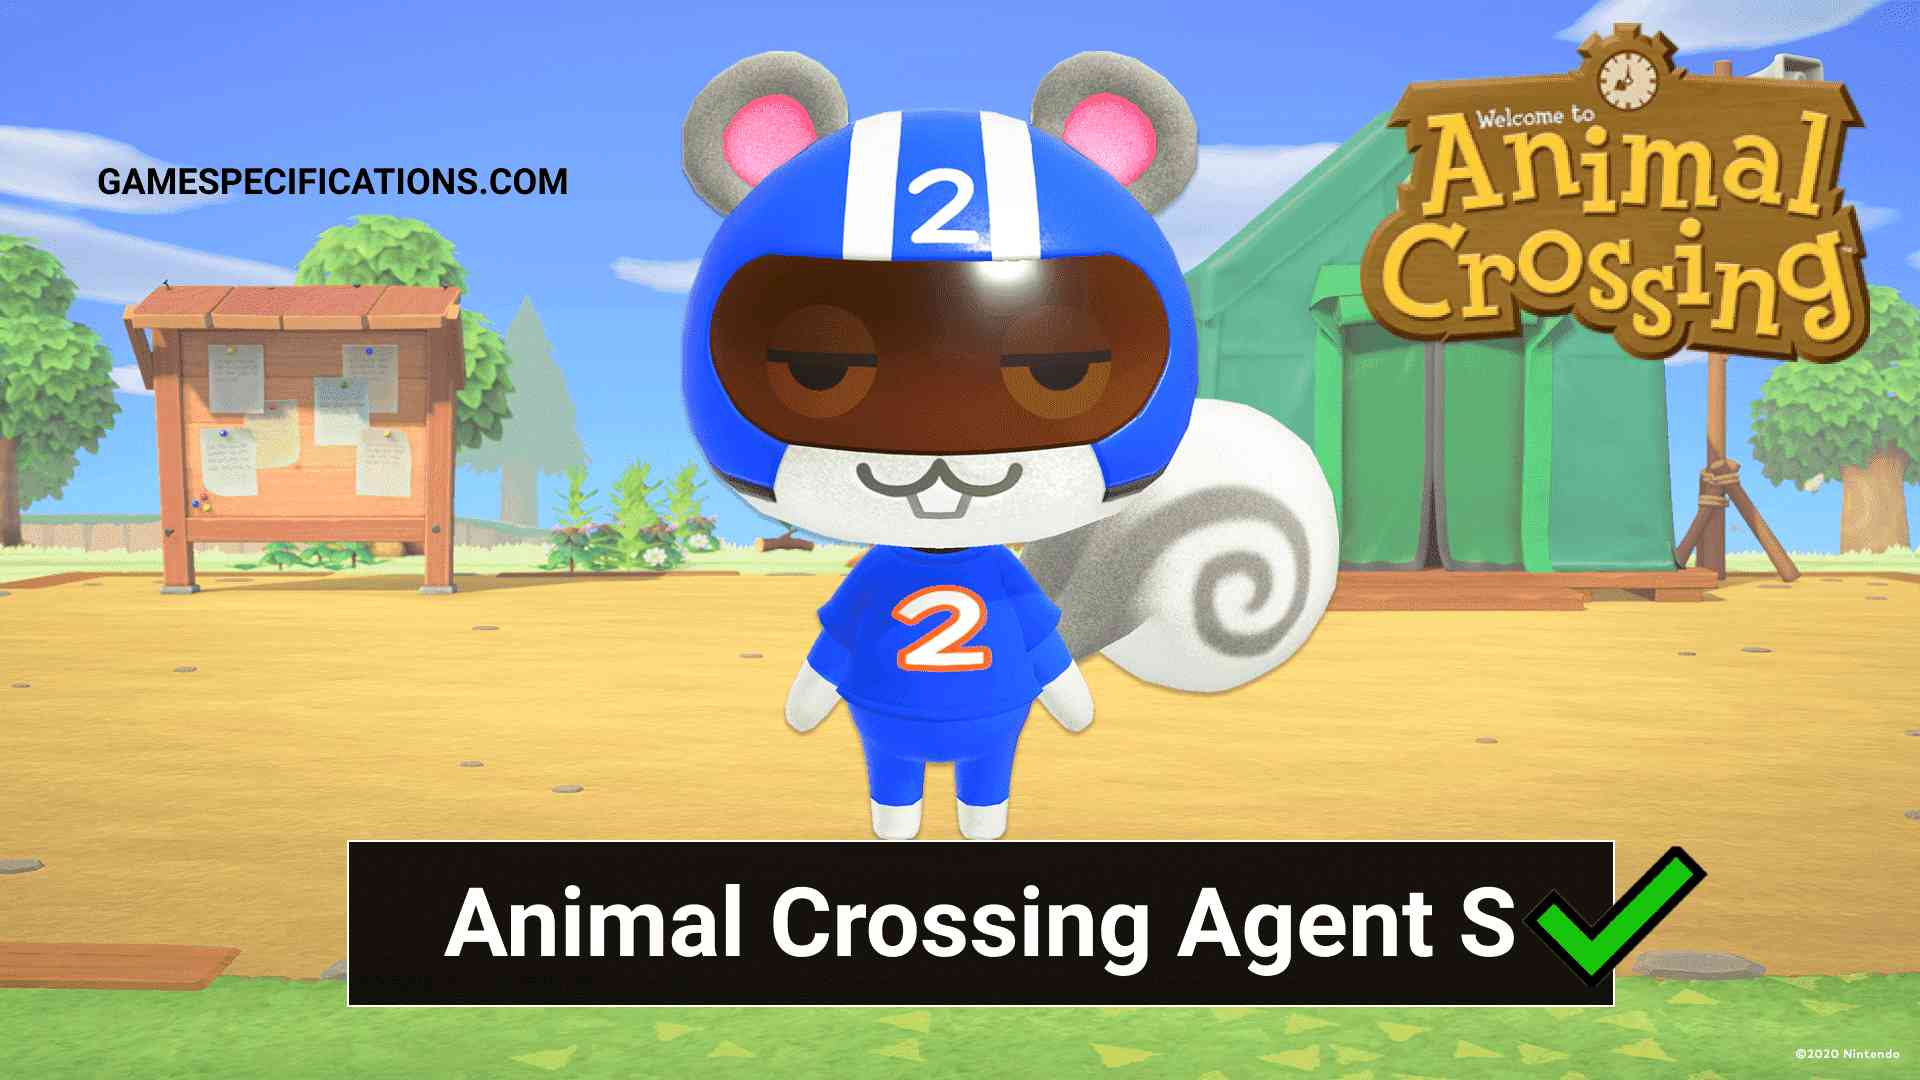 Agent S Animal Crossing Complete Character Guide - Game Specifications